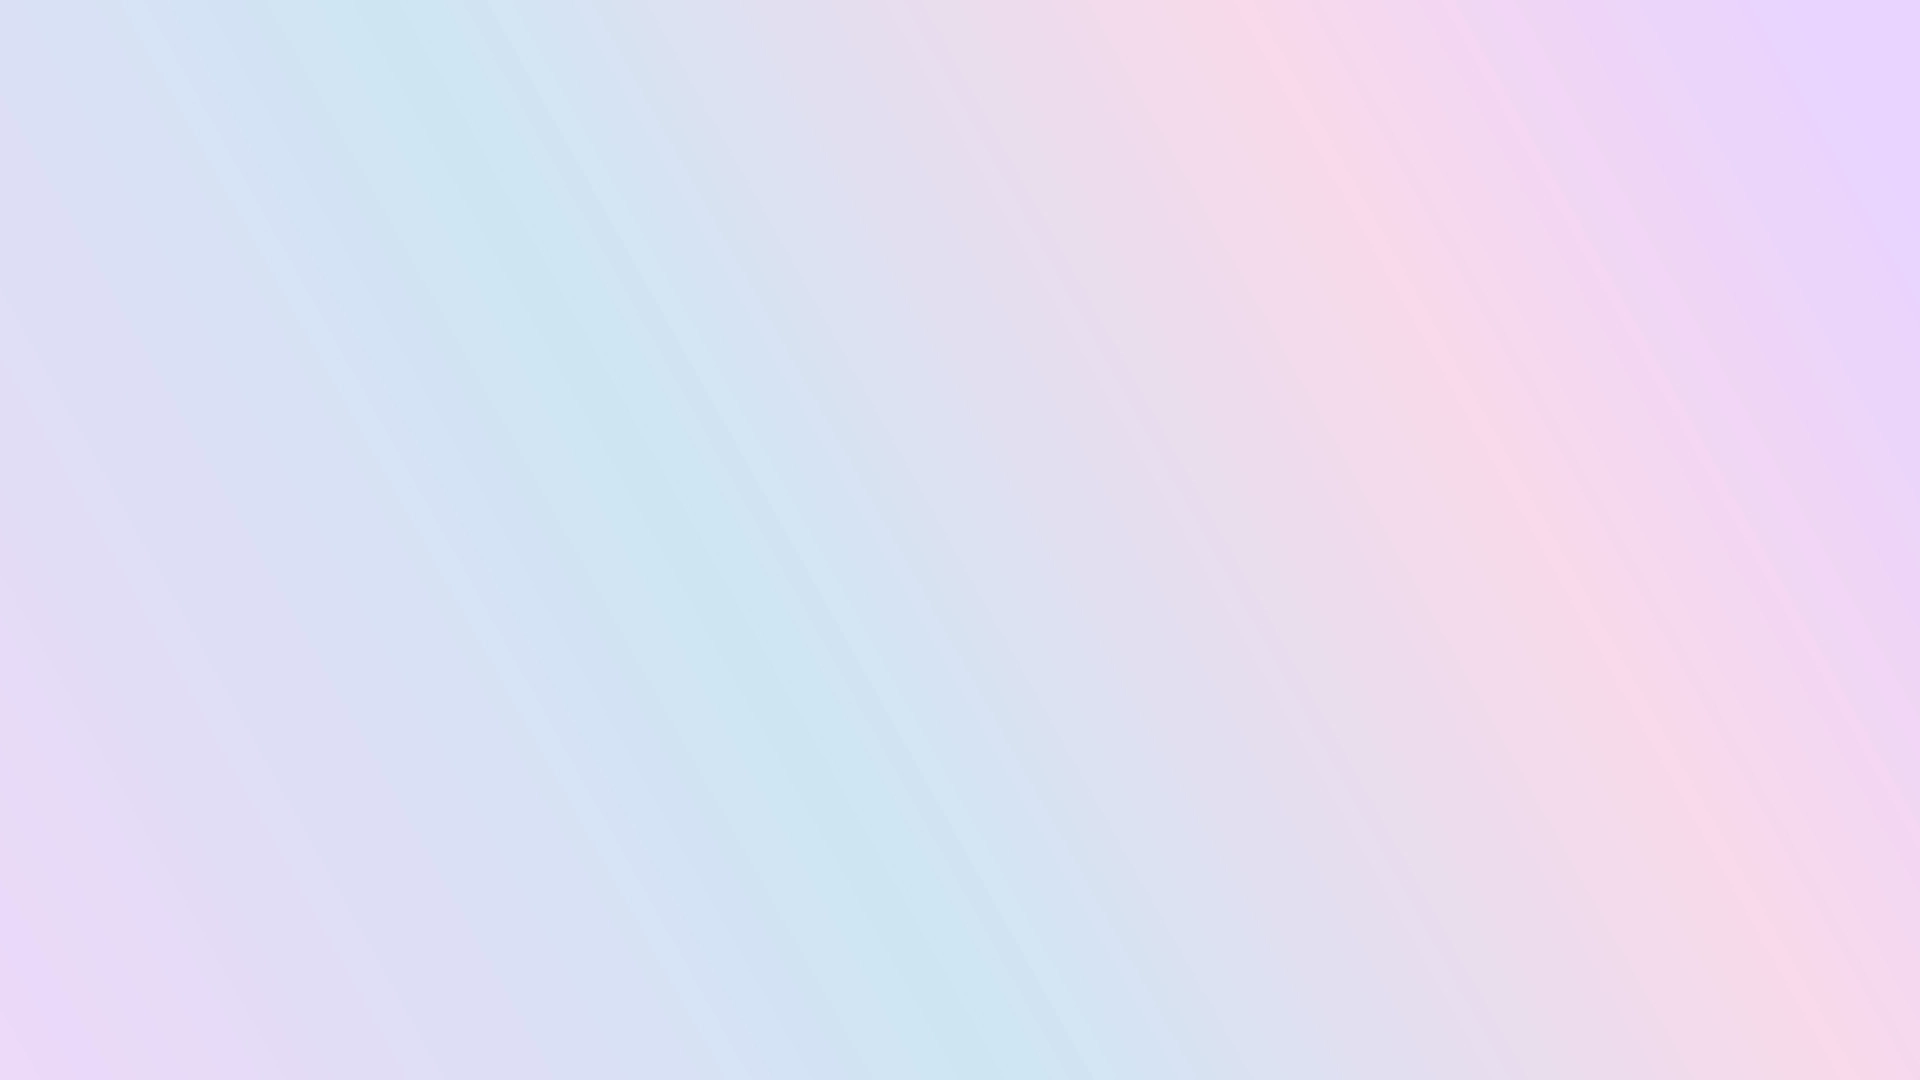 A pink and purple background with white stripes - Gradient